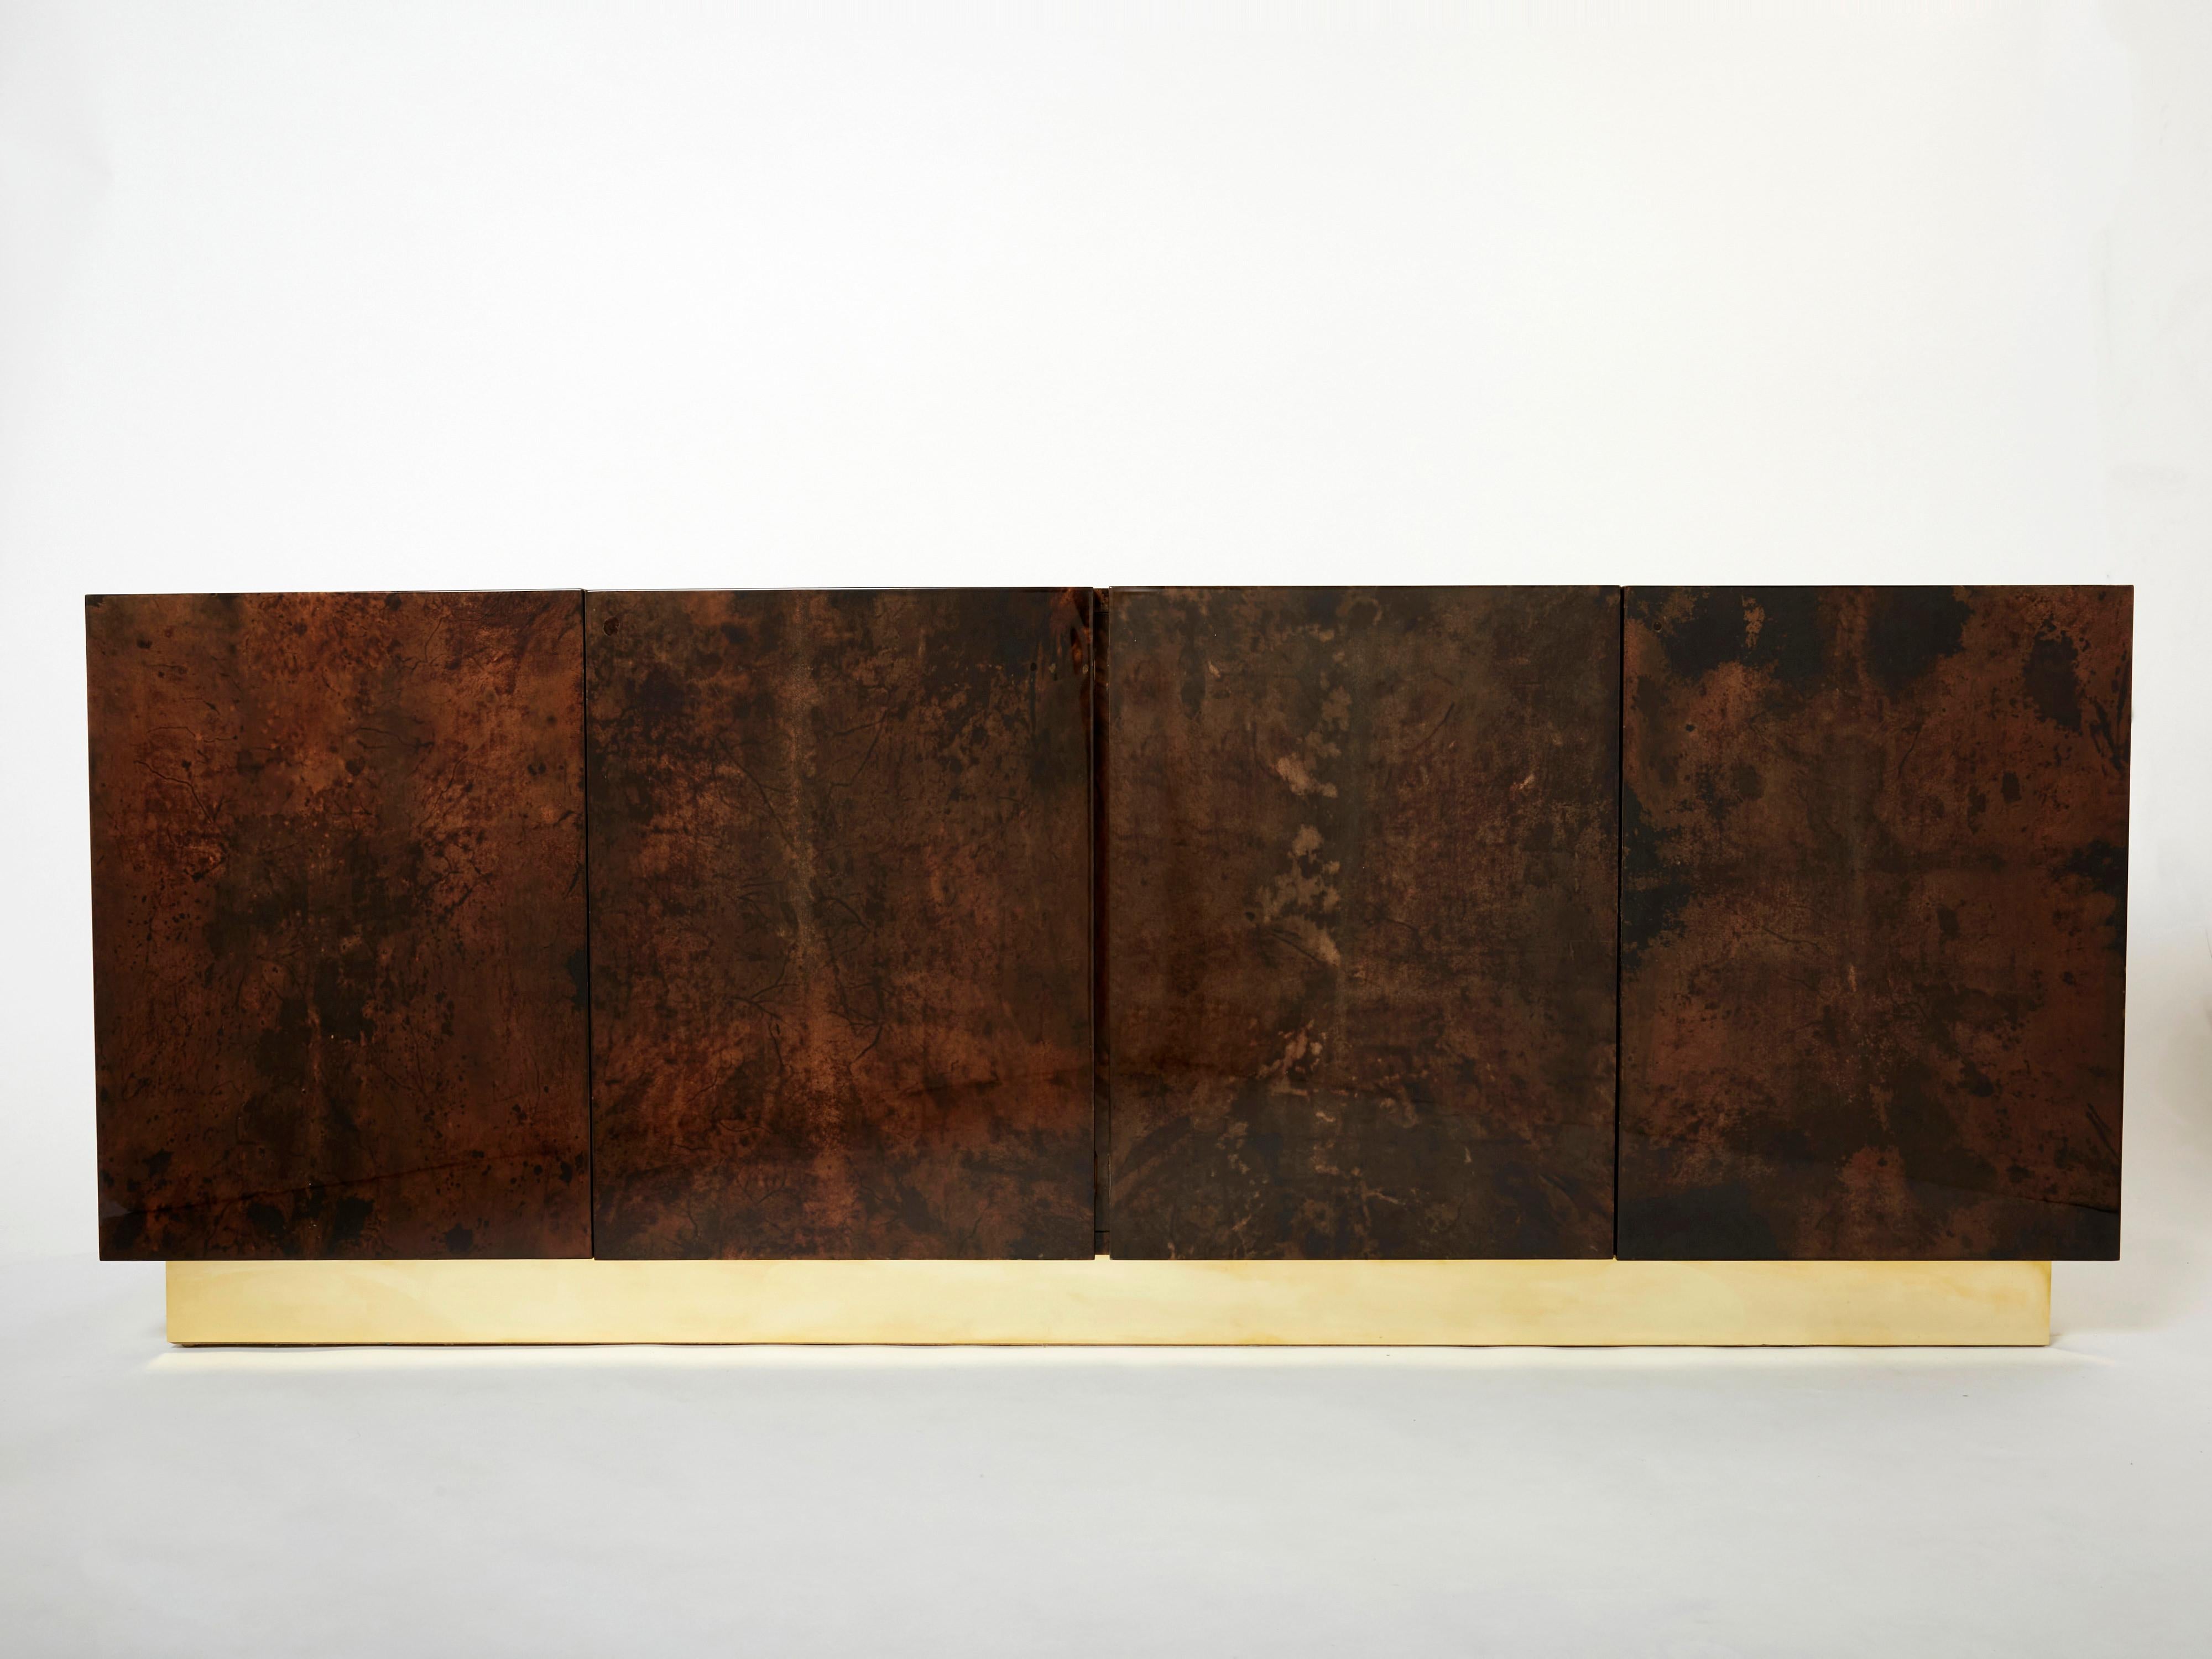 A unique and timeless vintage piece, this Aldo Tura mid-century sideboard feels imposing and glamourous. The varnished goatskin parchment, in rich shades of brown, makes this sideboard typical of designer Aldo Tura. Its boxy, simple style, featuring